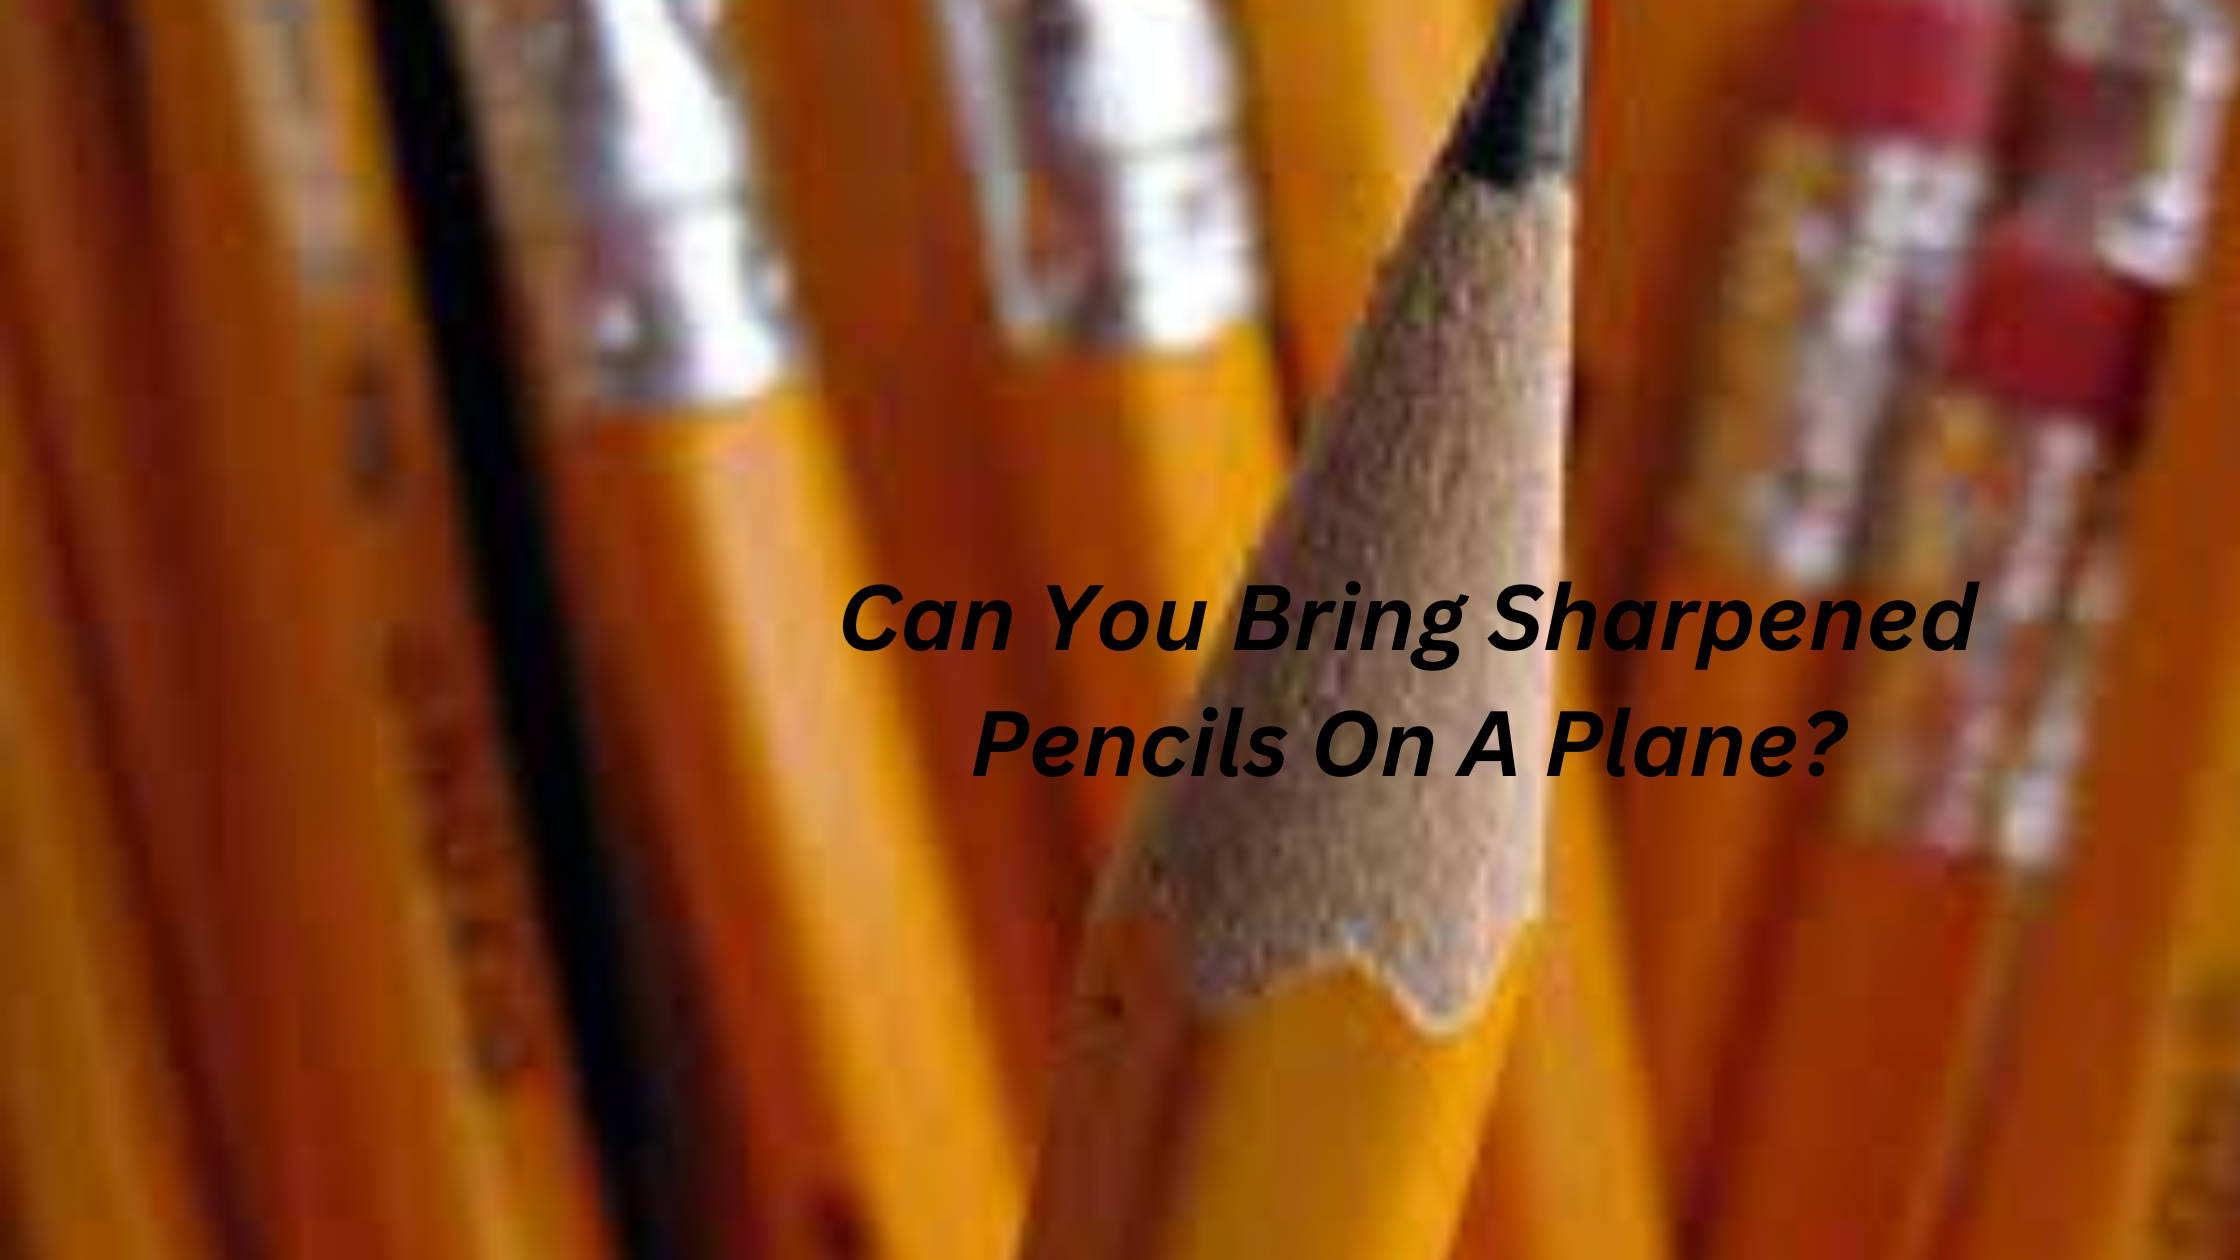 Can You Bring Sharpened Pencils On A Plane?